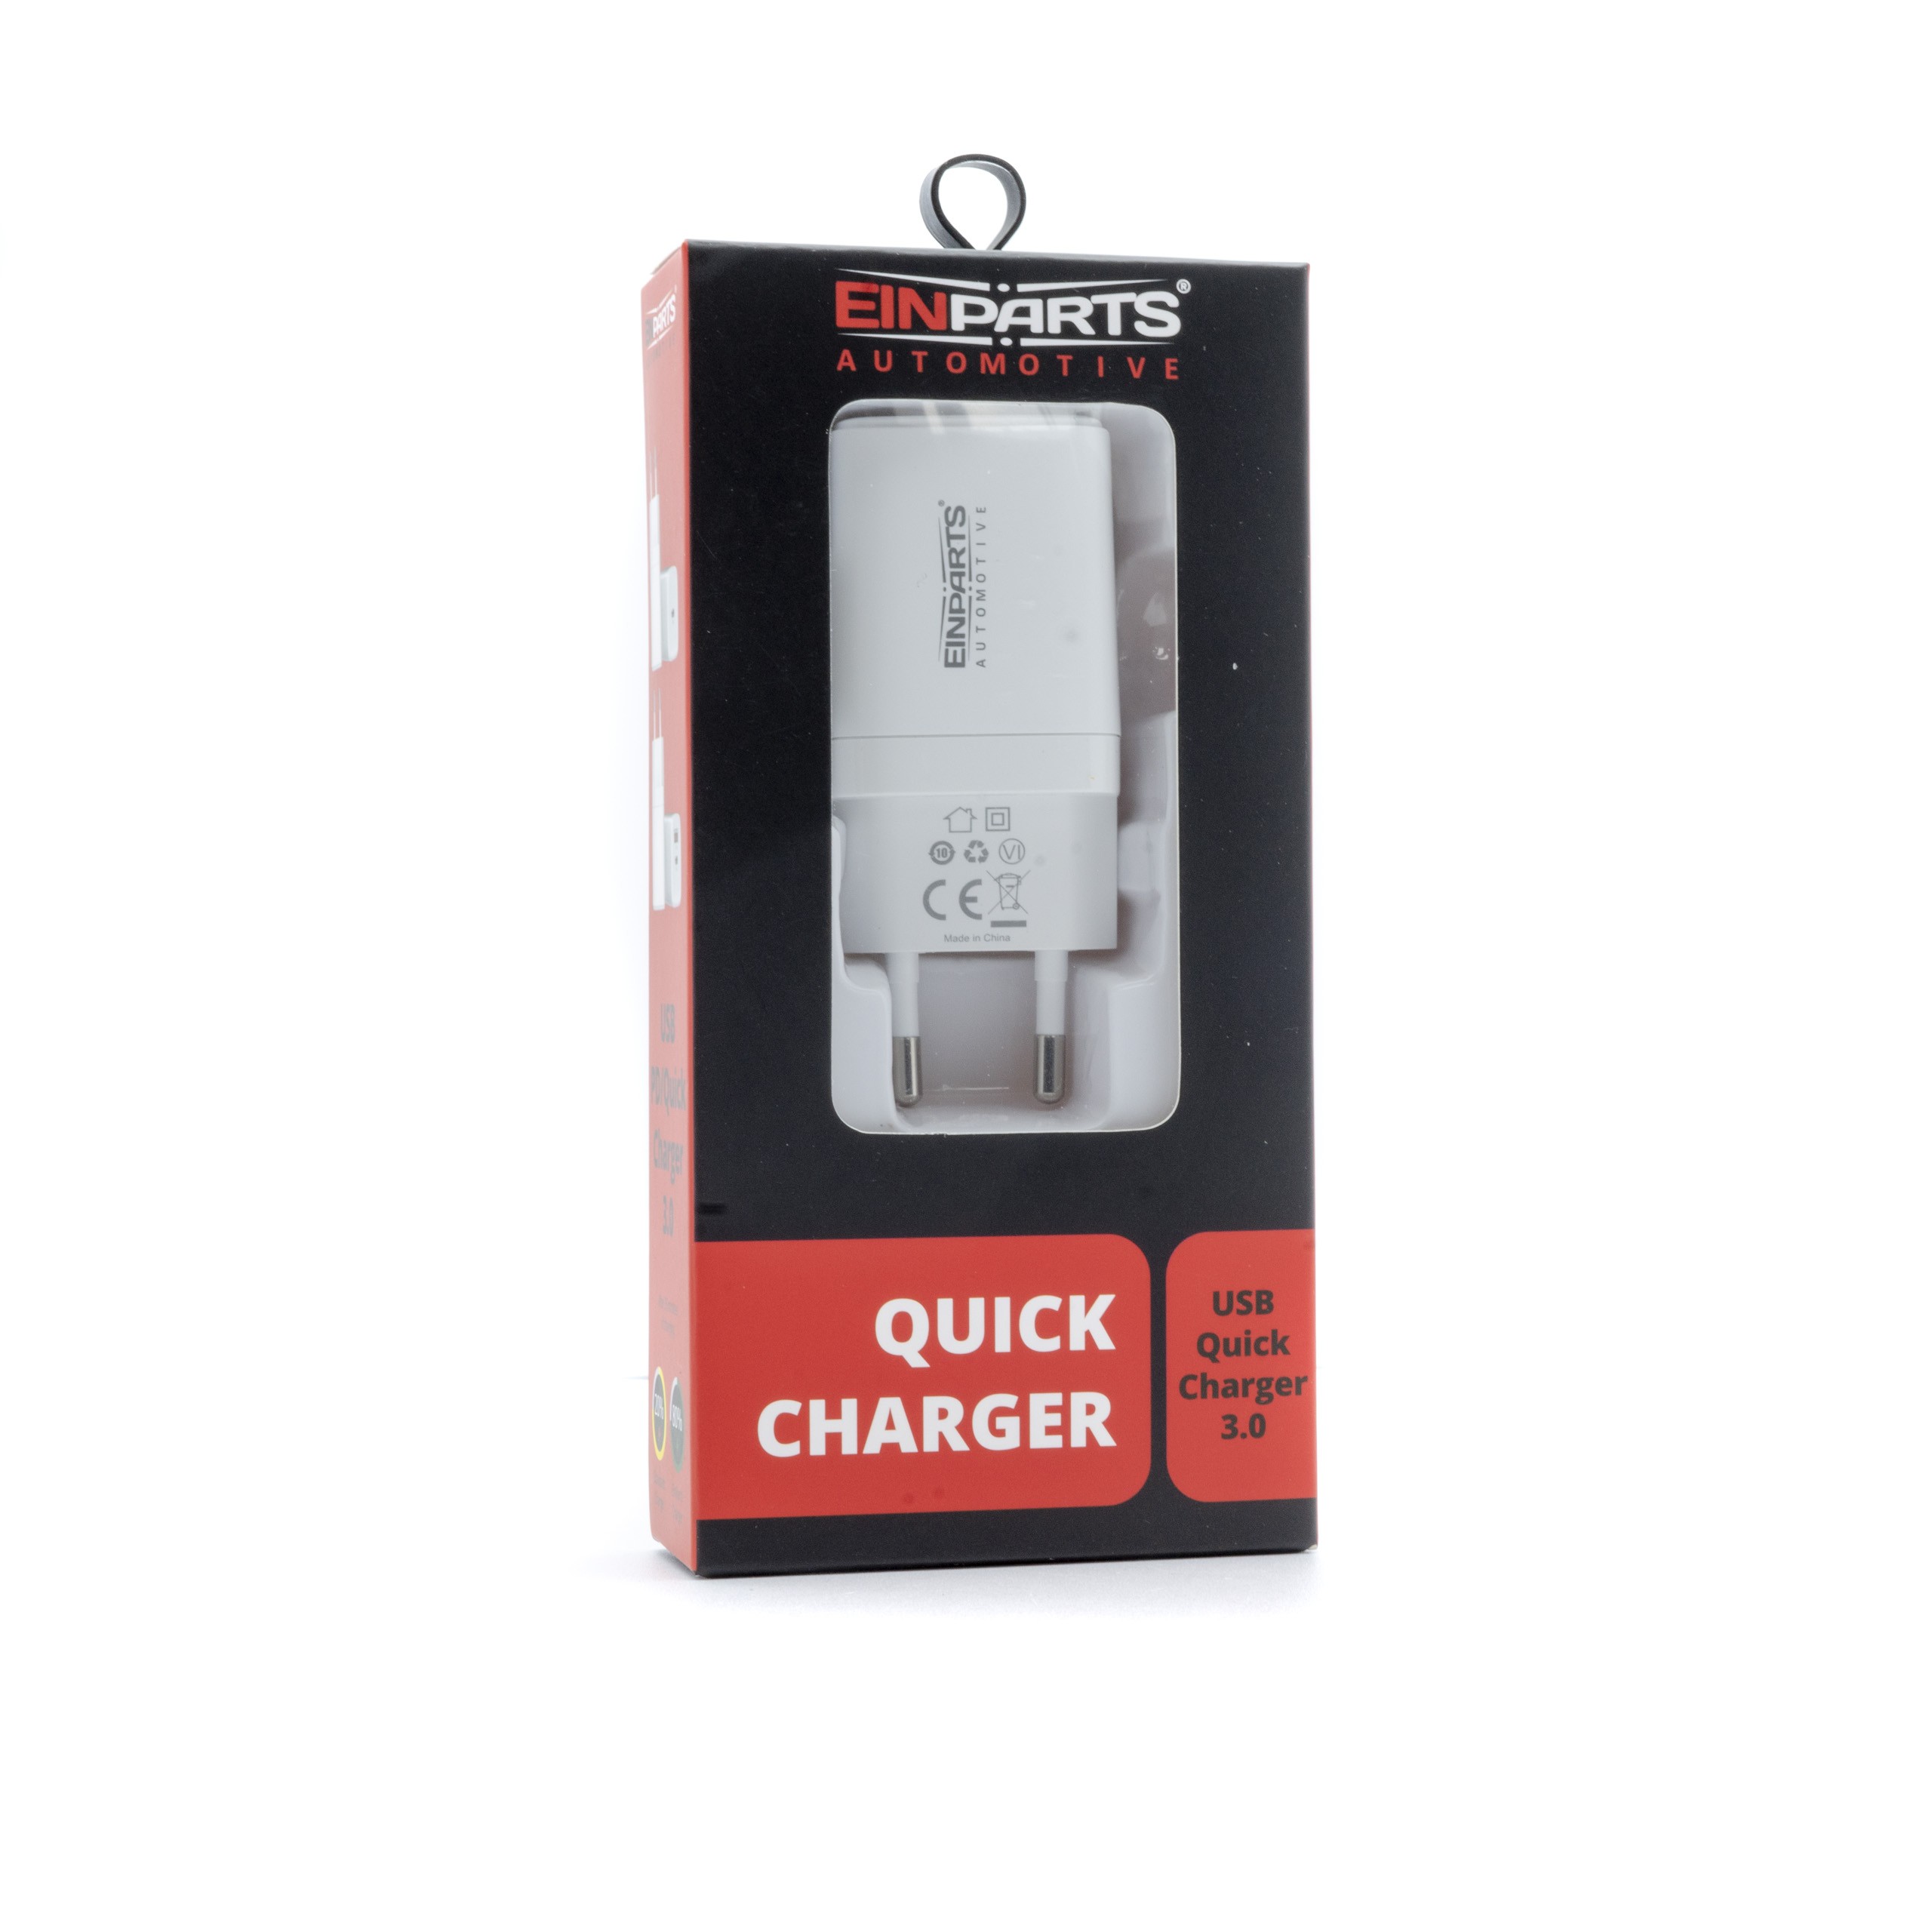 EPACC014 QUICK CHARGER